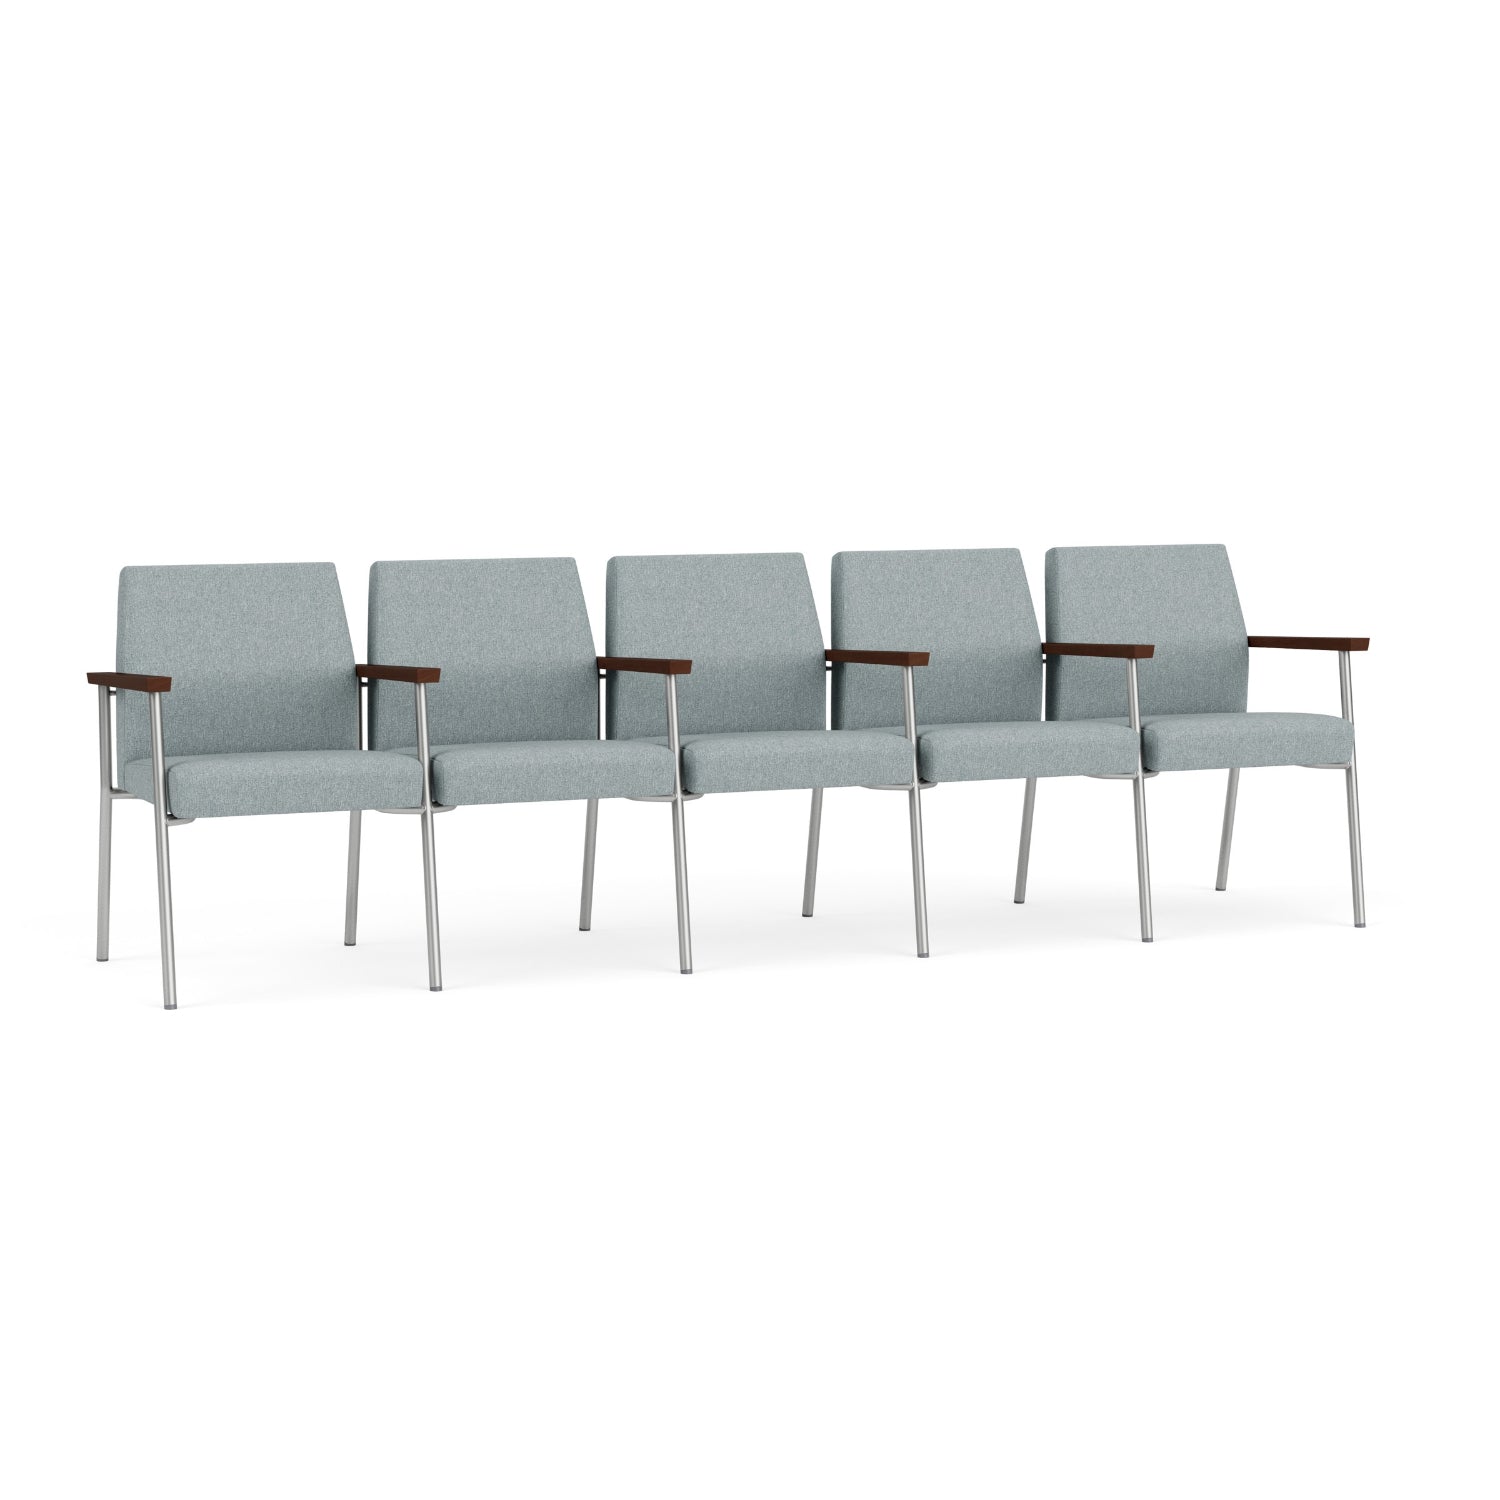 Mystic Guest Collection Reception Seating, 5 Seats with Center Arms, Healthcare Vinyl Upholstery, FREE SHIPPING